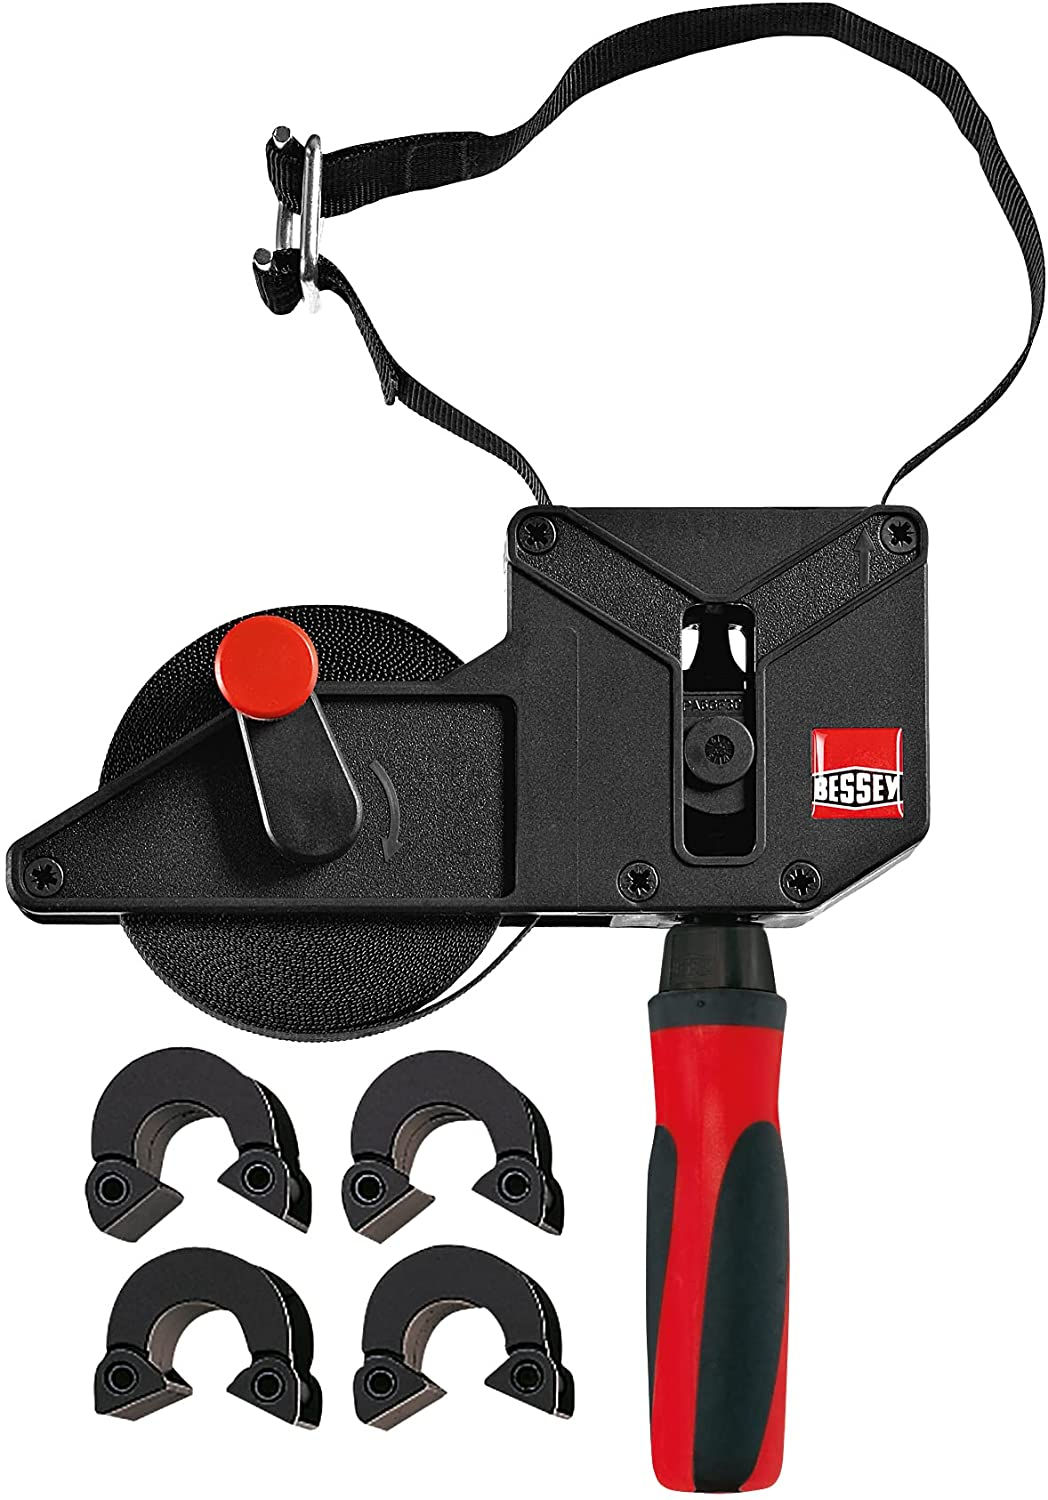 Bessey Tools VAS-23 2K Variable Angle Strap Clamp with 4 Clips,Black with red handle - $19.36 at Amazon.com